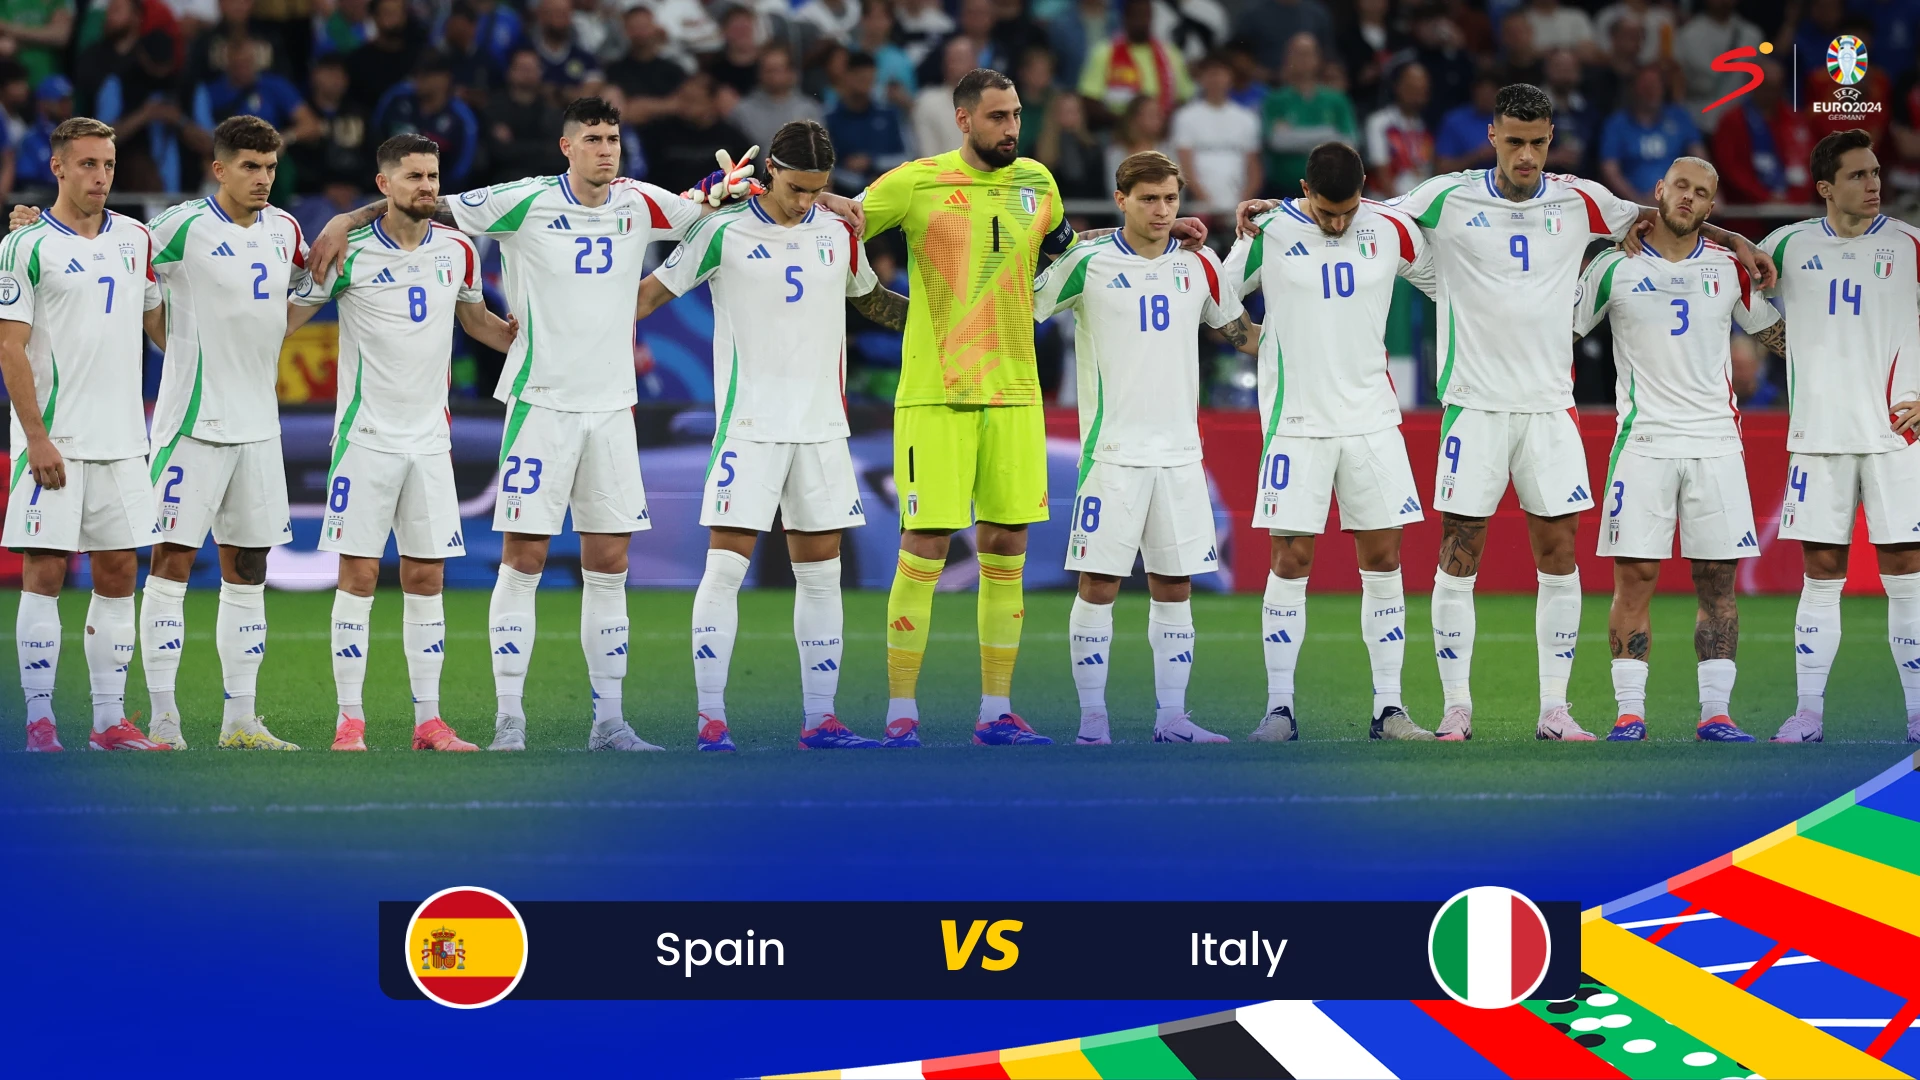 Italy down after Spain humbling, but not out